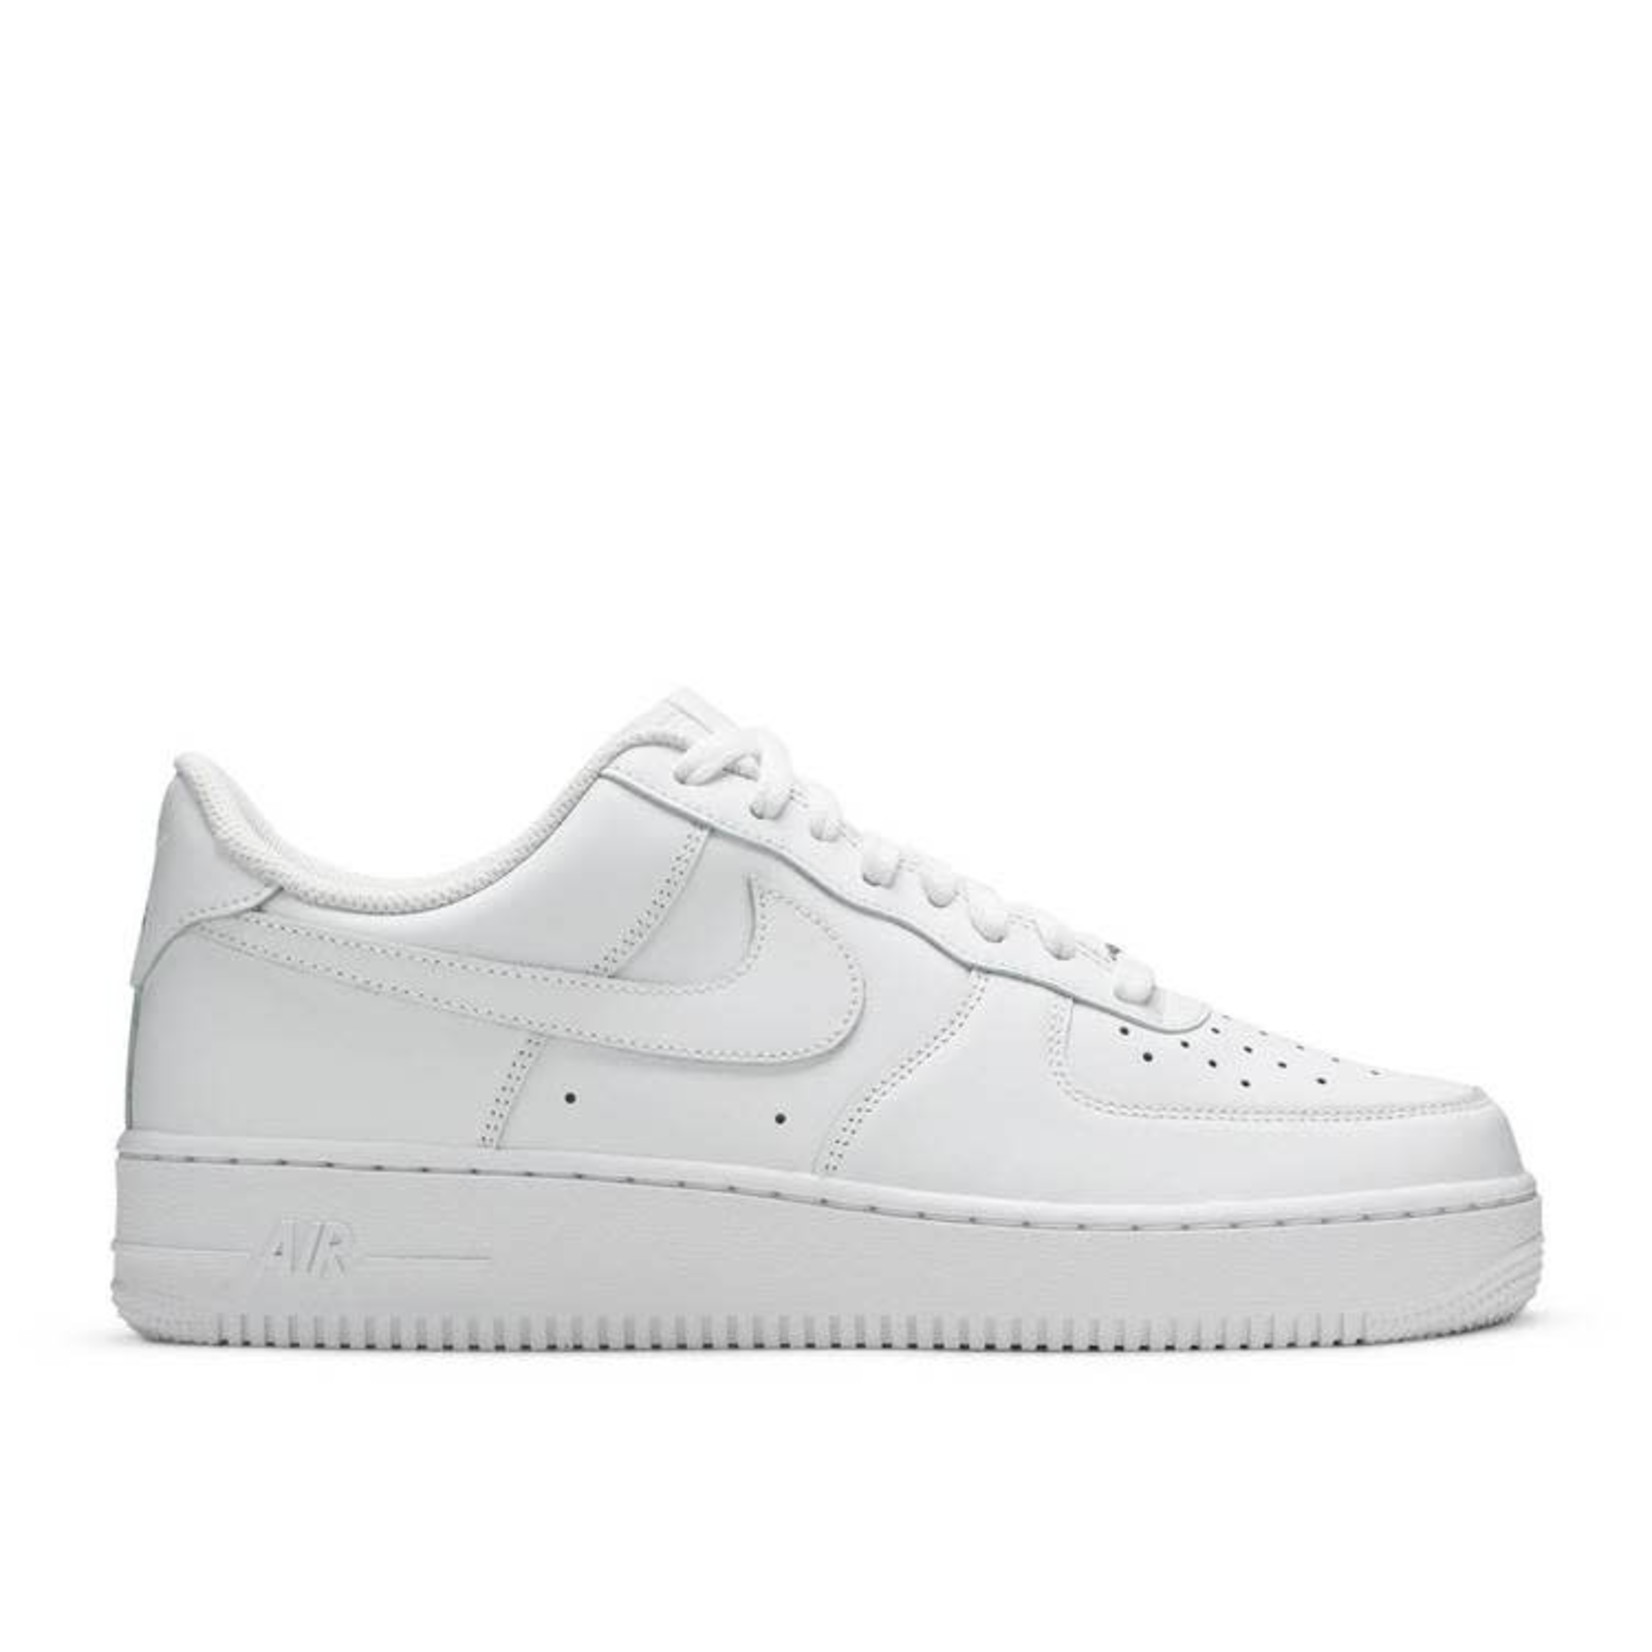 Nike Nike Air Force 1 Low LE Triple White (GS) Size 5, DS BRAND NEW